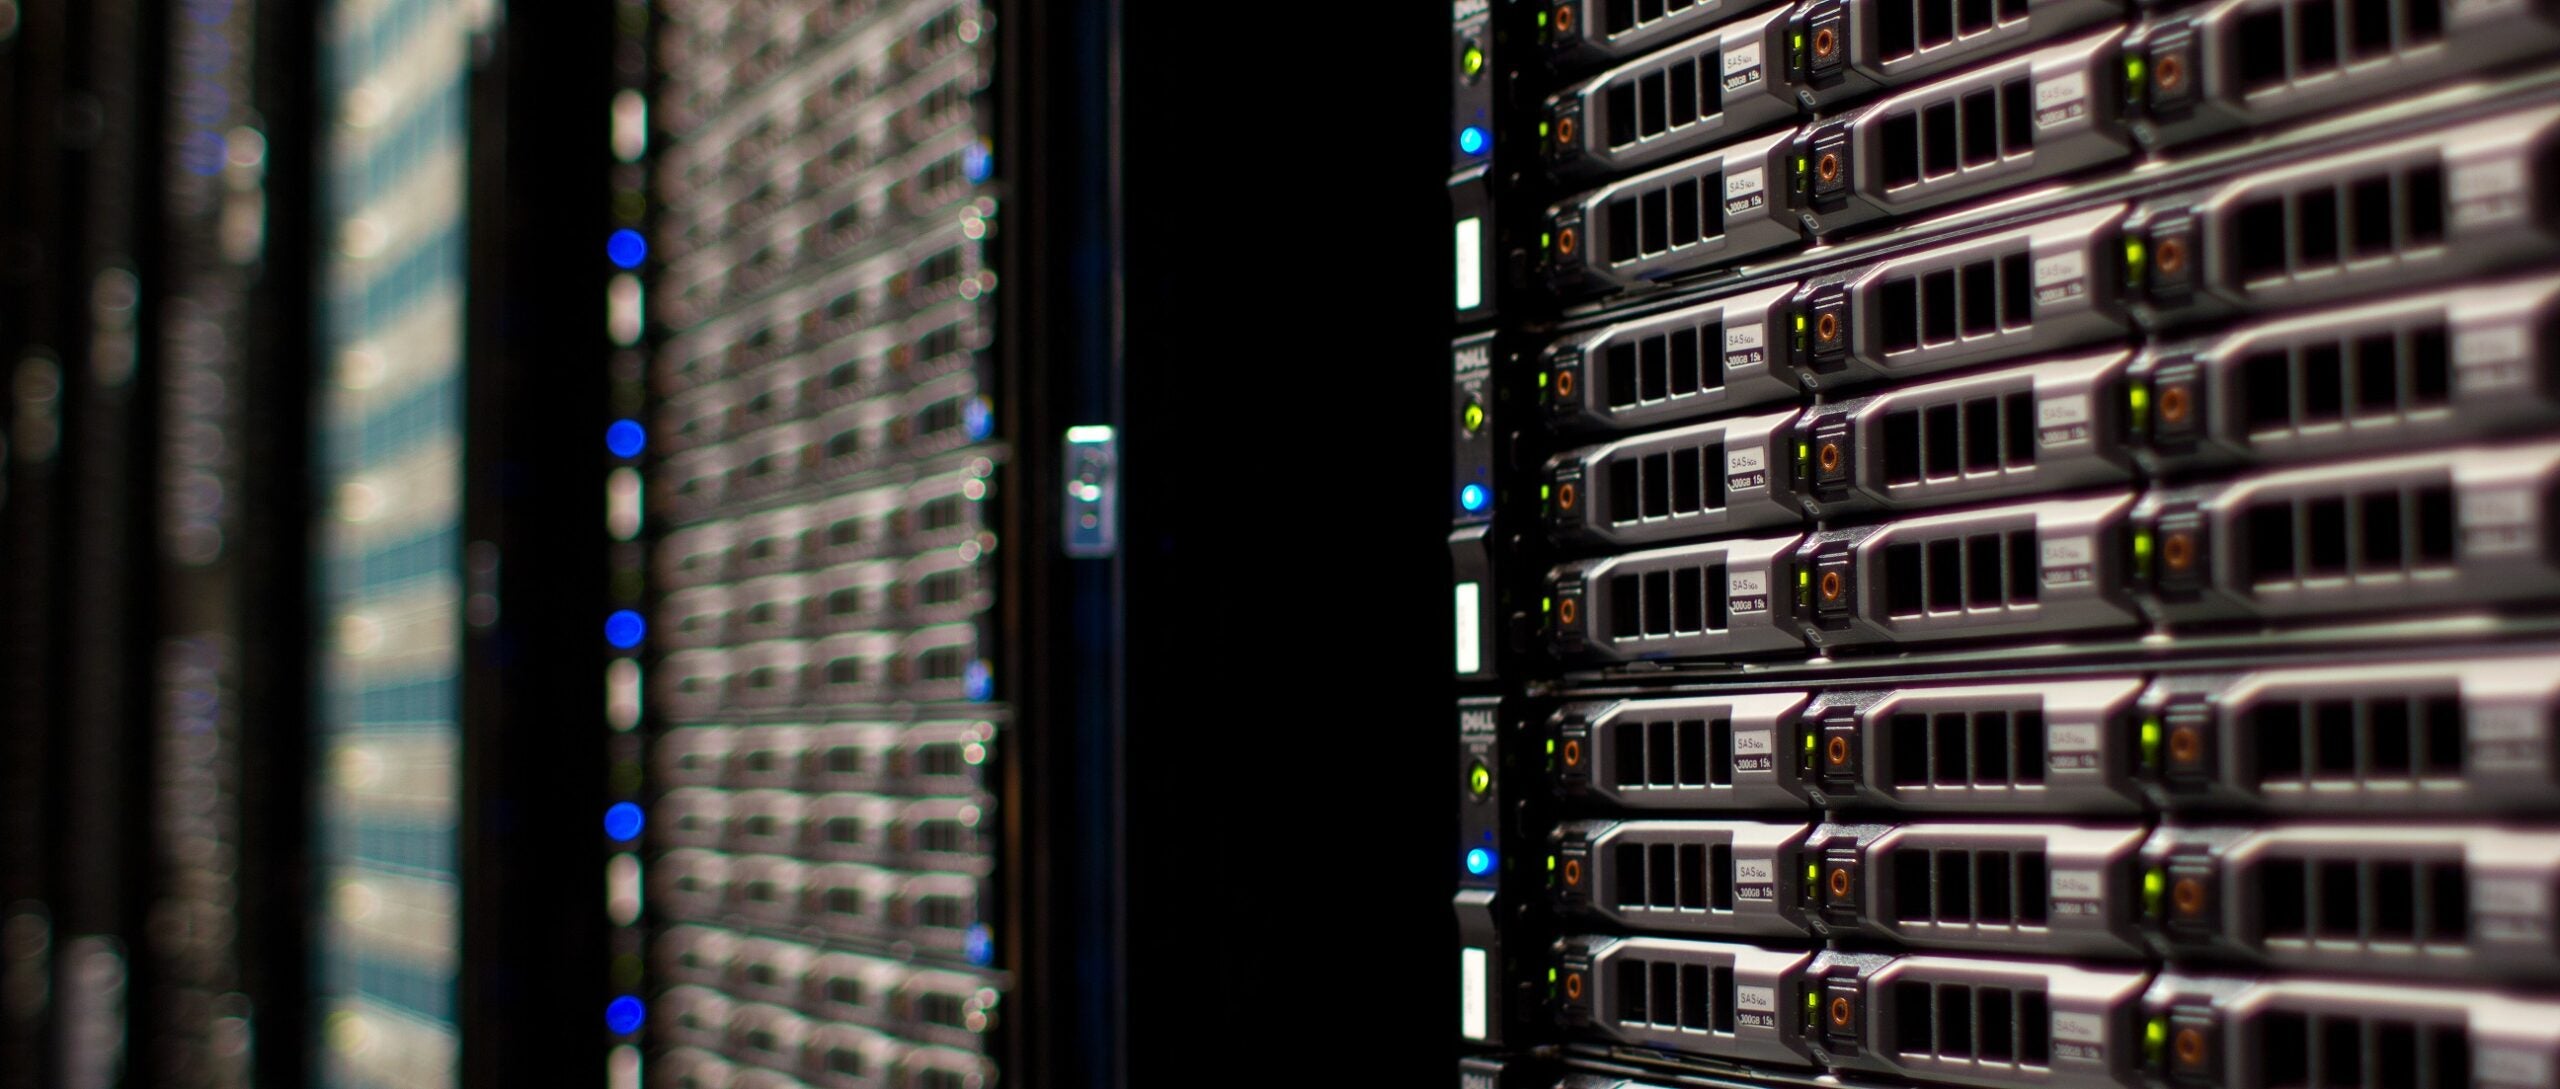 Expansion, consolidation & transformation: 10 data centre companies starting 2016 with a big bang